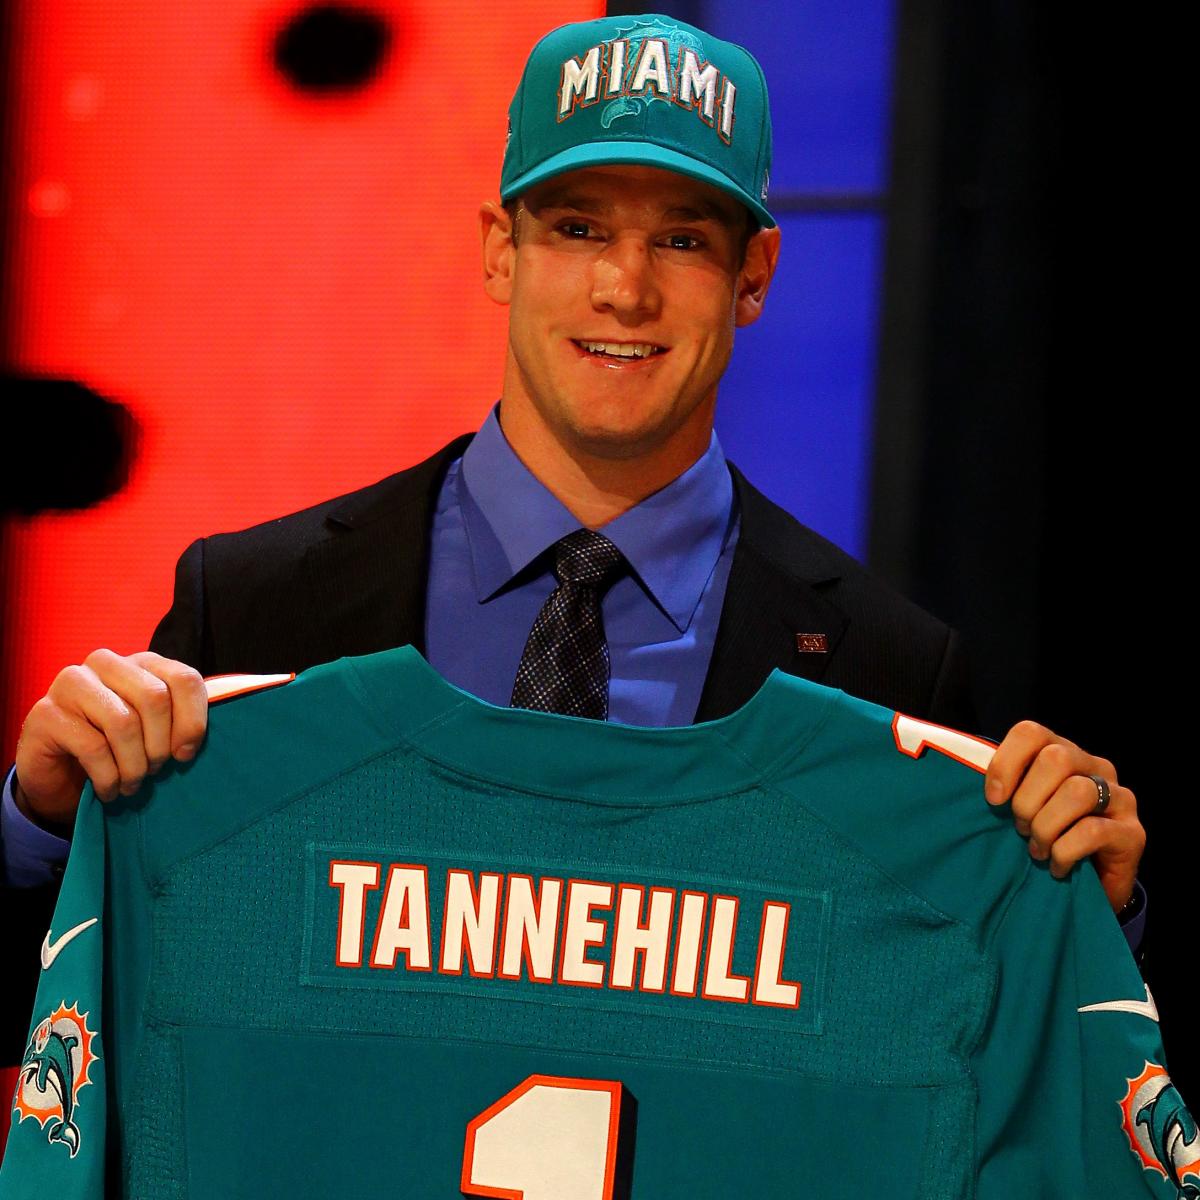 Miami Dolphins 2013 NFL Mock Draft BestCase Scenarios for All 7